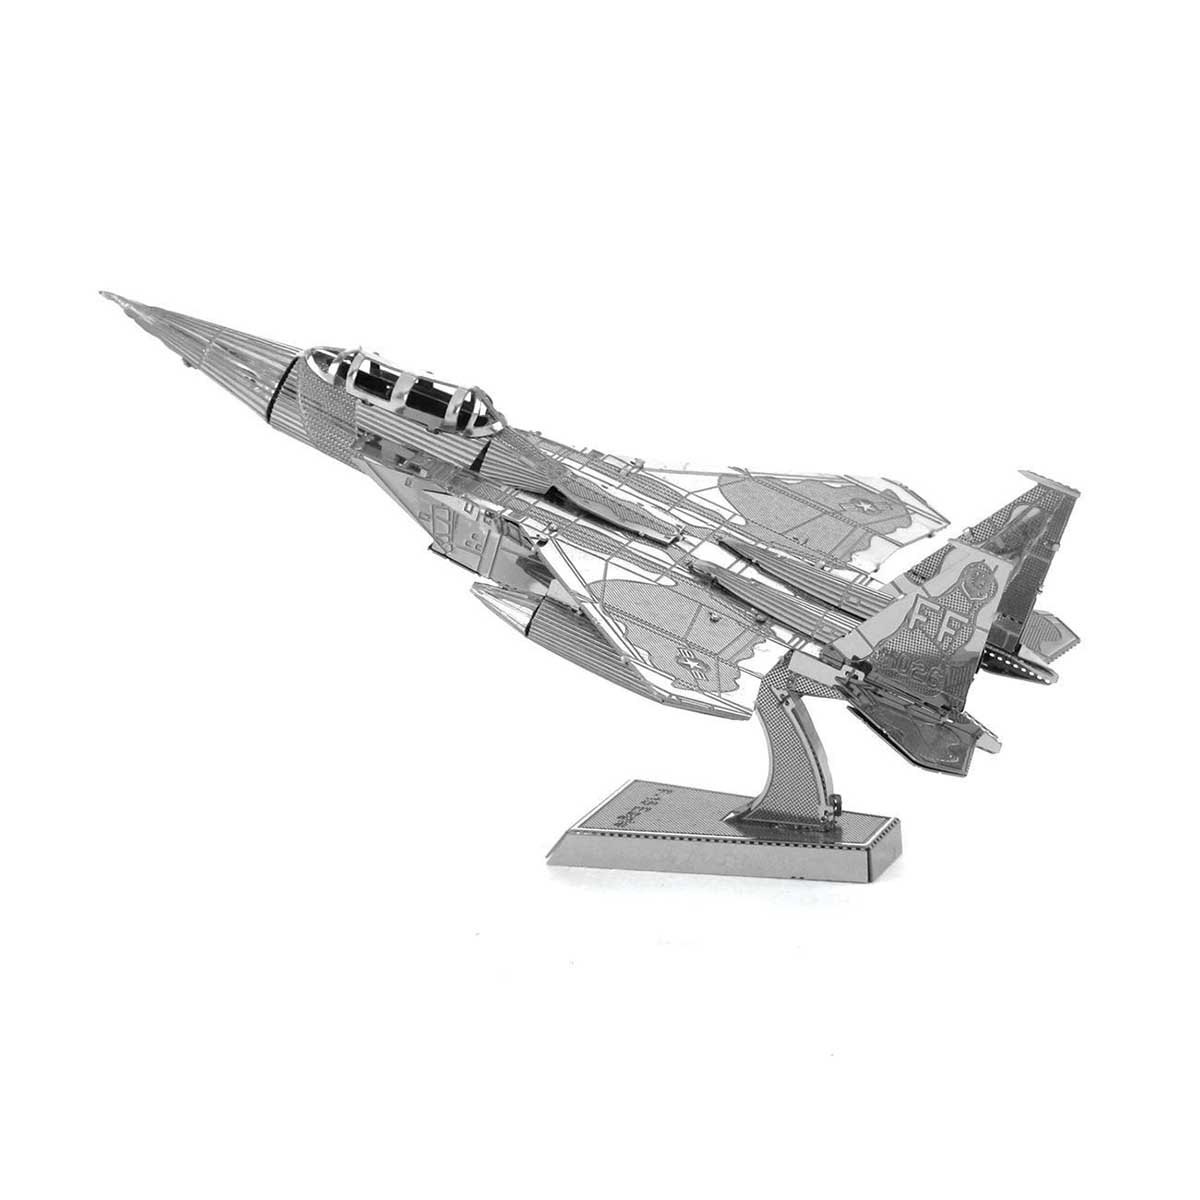 Mustang P-51 Boeing plane Military Metal Puzzles By Metal Earth